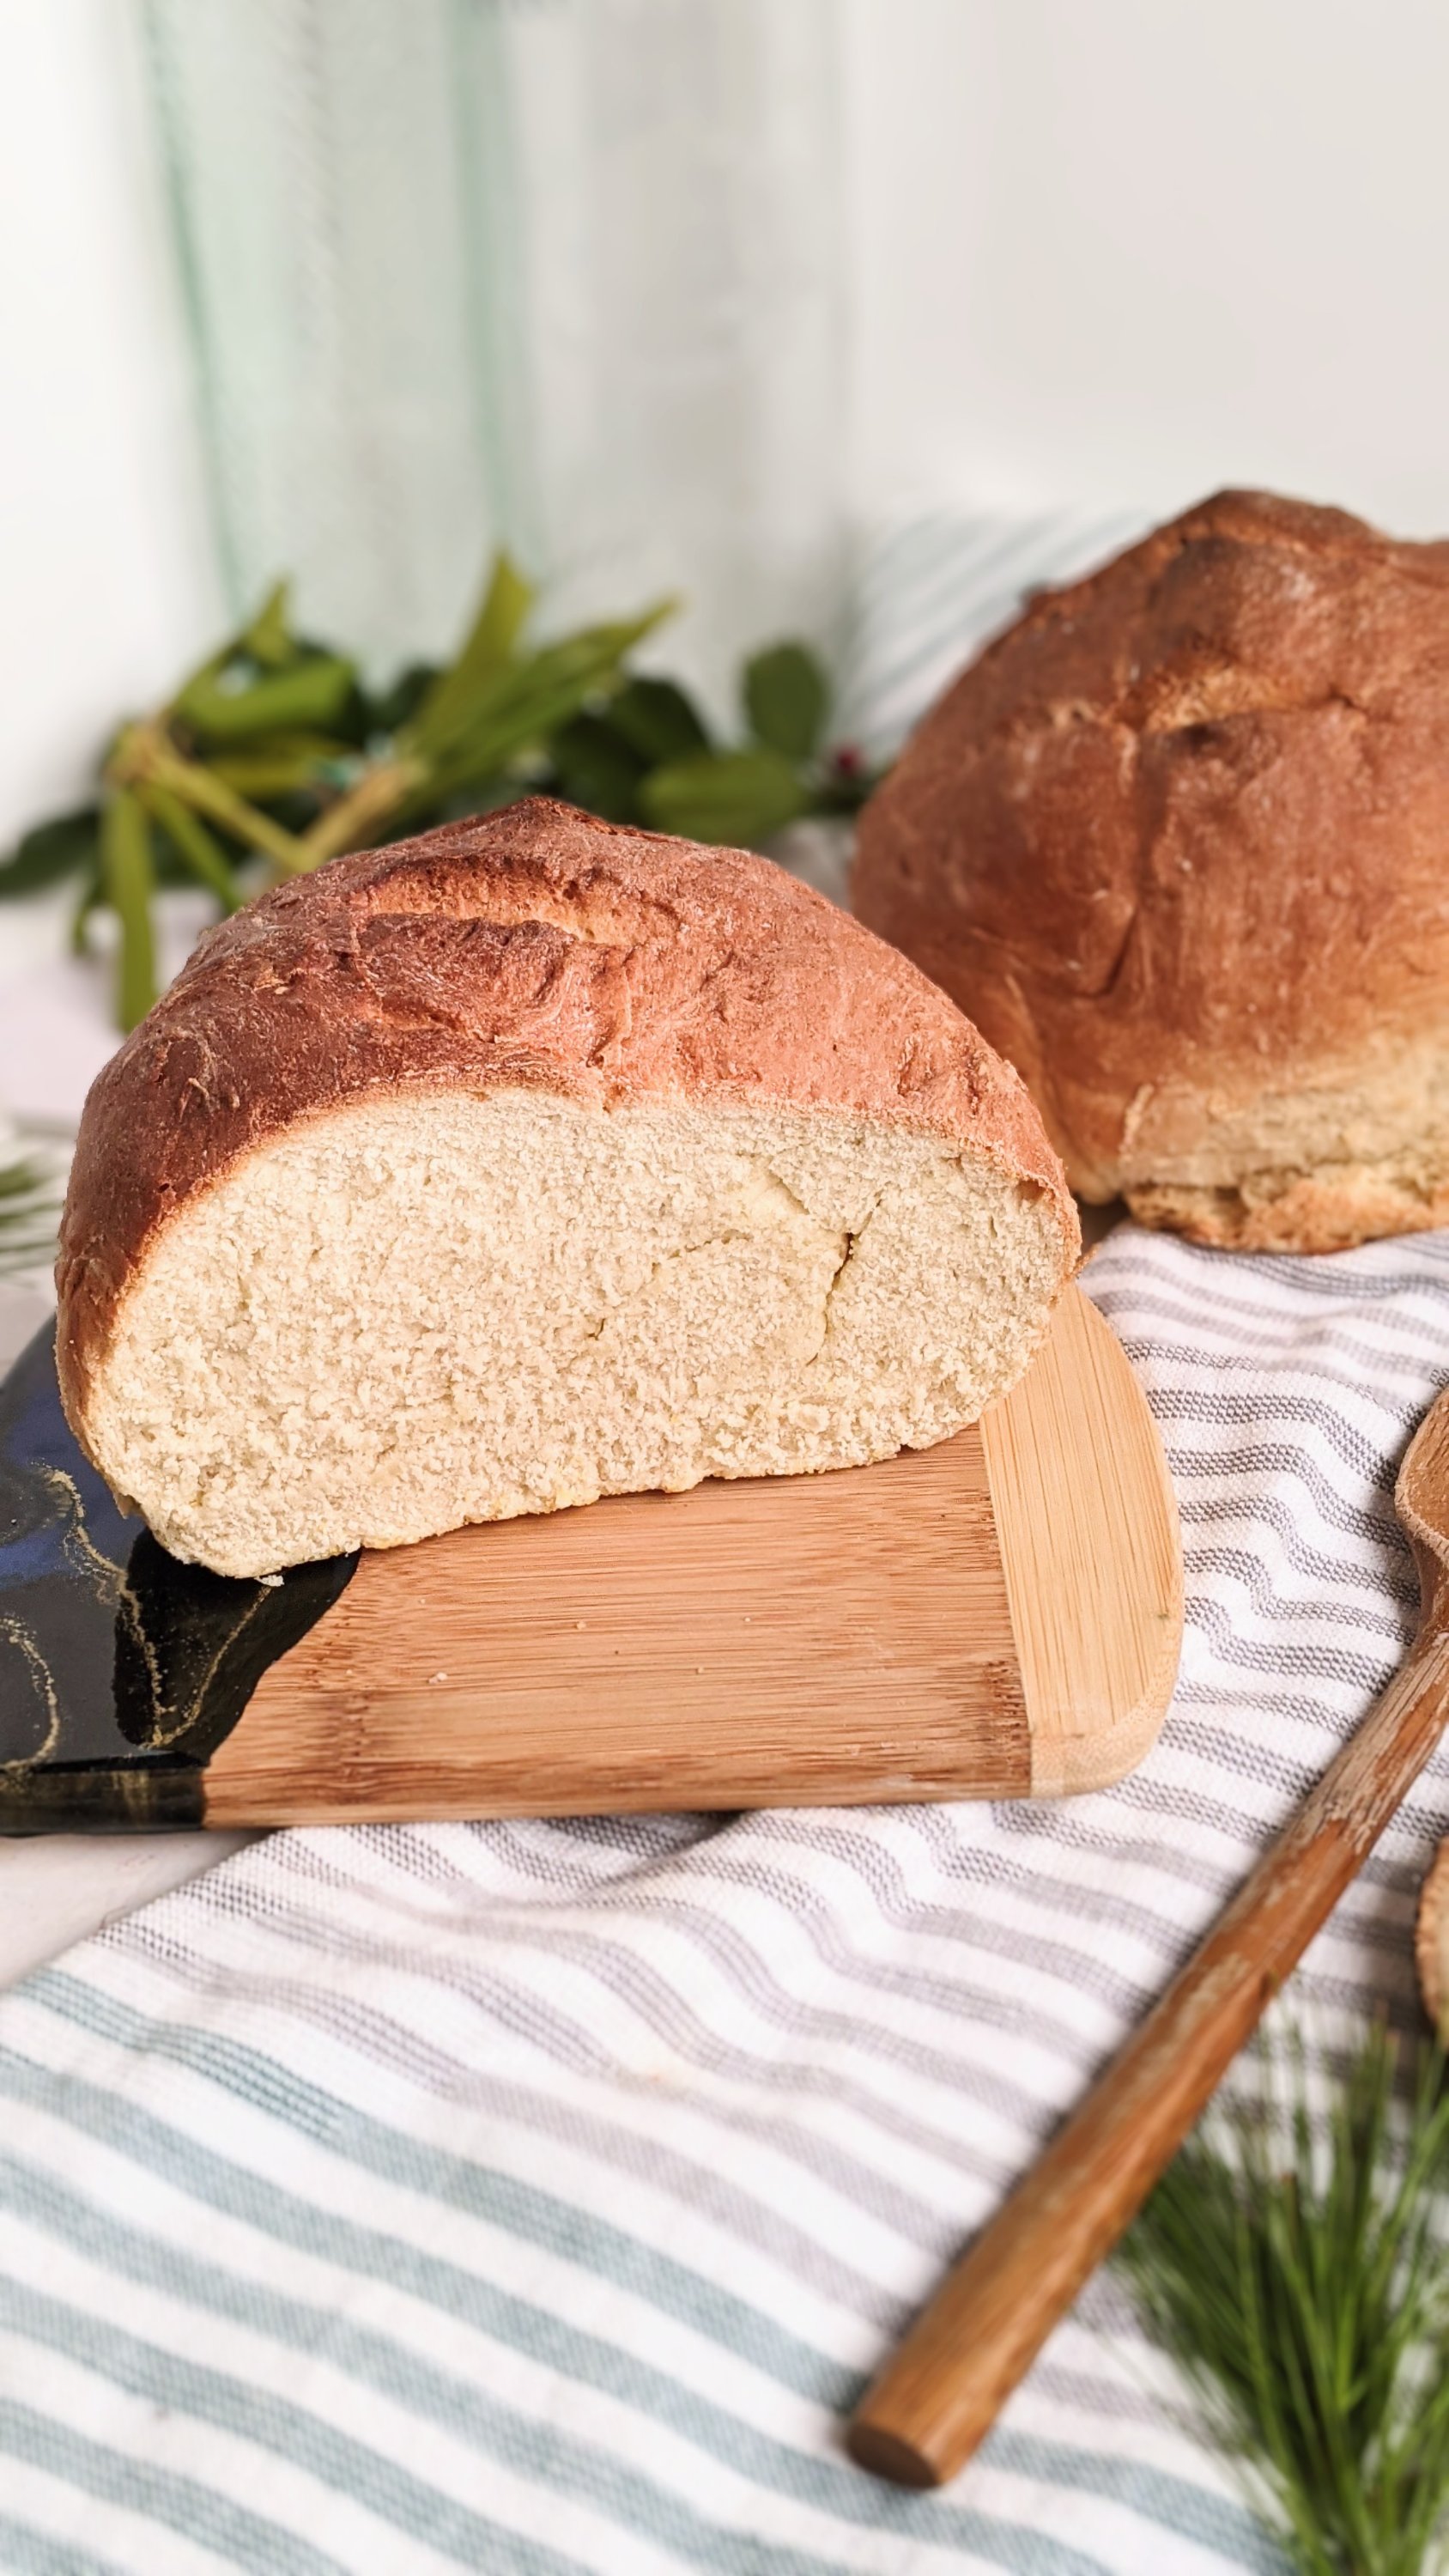 quick yeast bread recipe healthy bread 5 ingredients 1 hour to rise easy dinner loaves for sandwiches or garlic bread healthy simple breads recipe